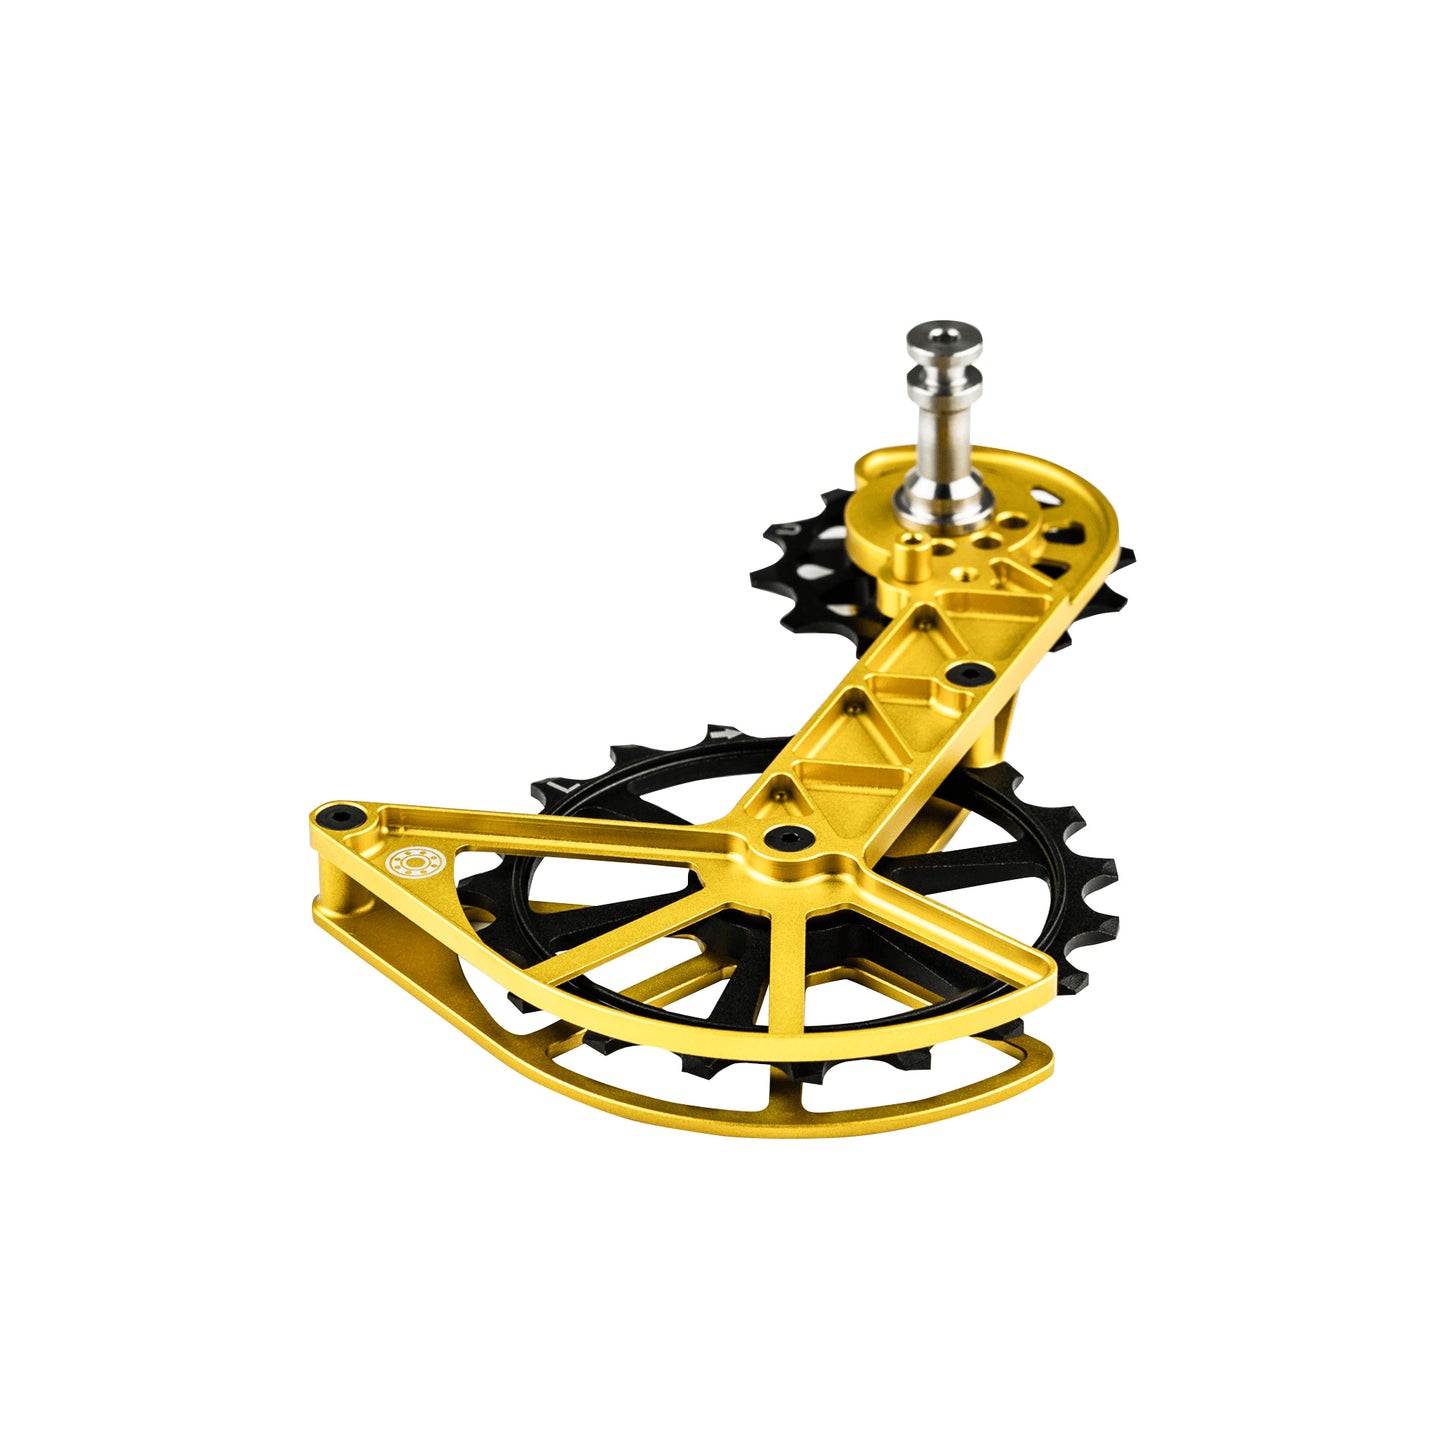 Kolossos Oversized Pulley Cage, Shim R9100 - Gold